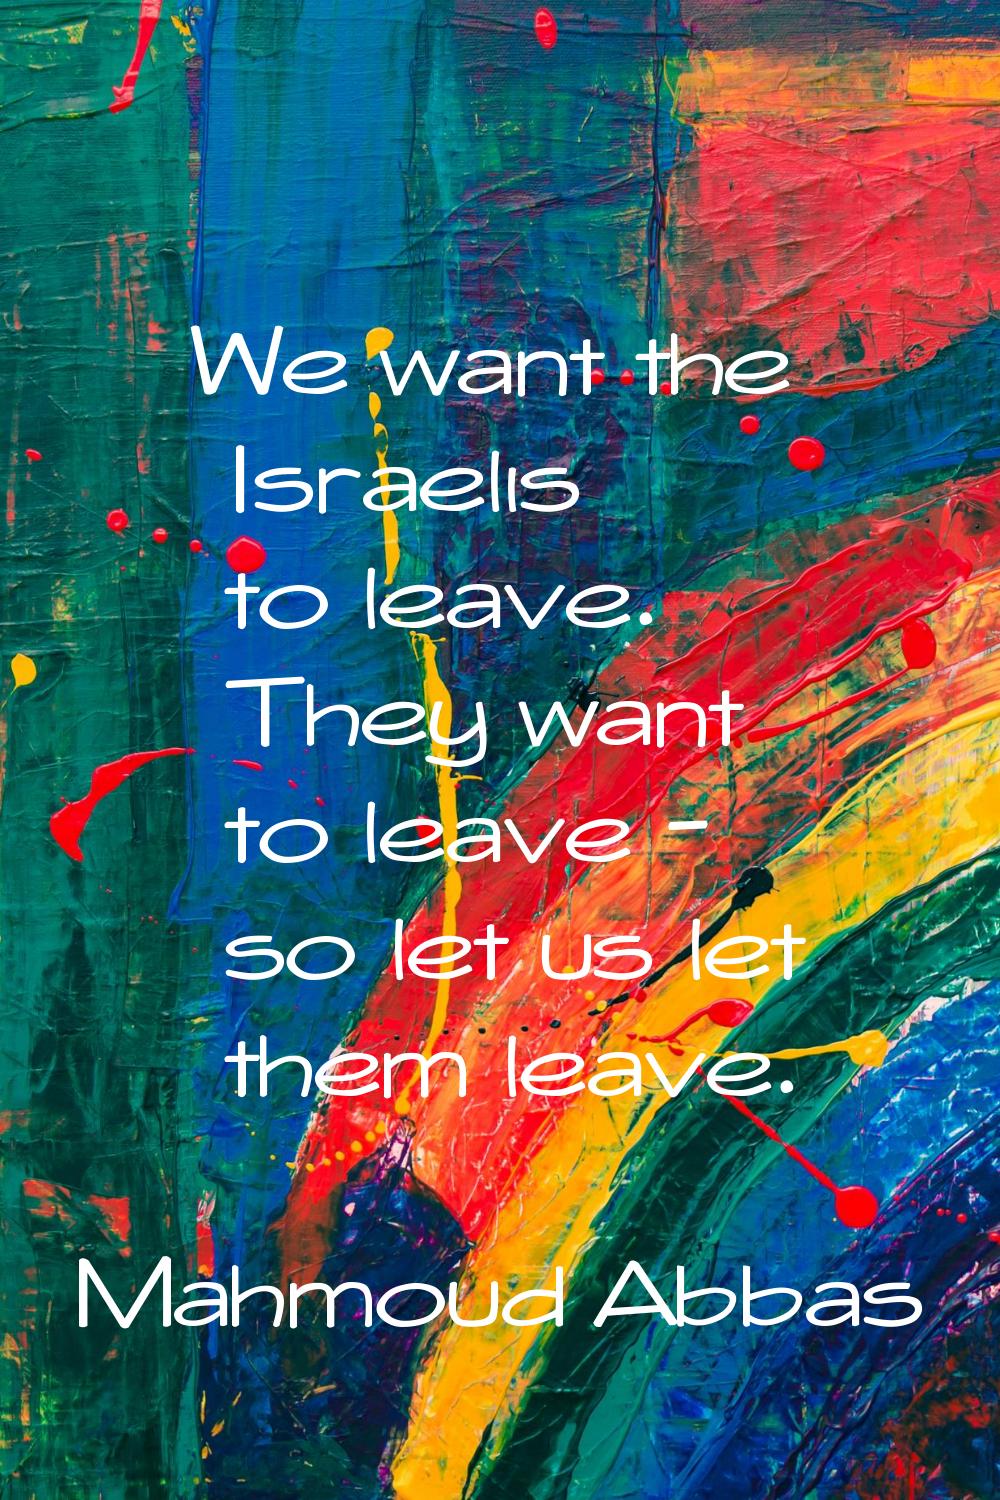 We want the Israelis to leave. They want to leave - so let us let them leave.